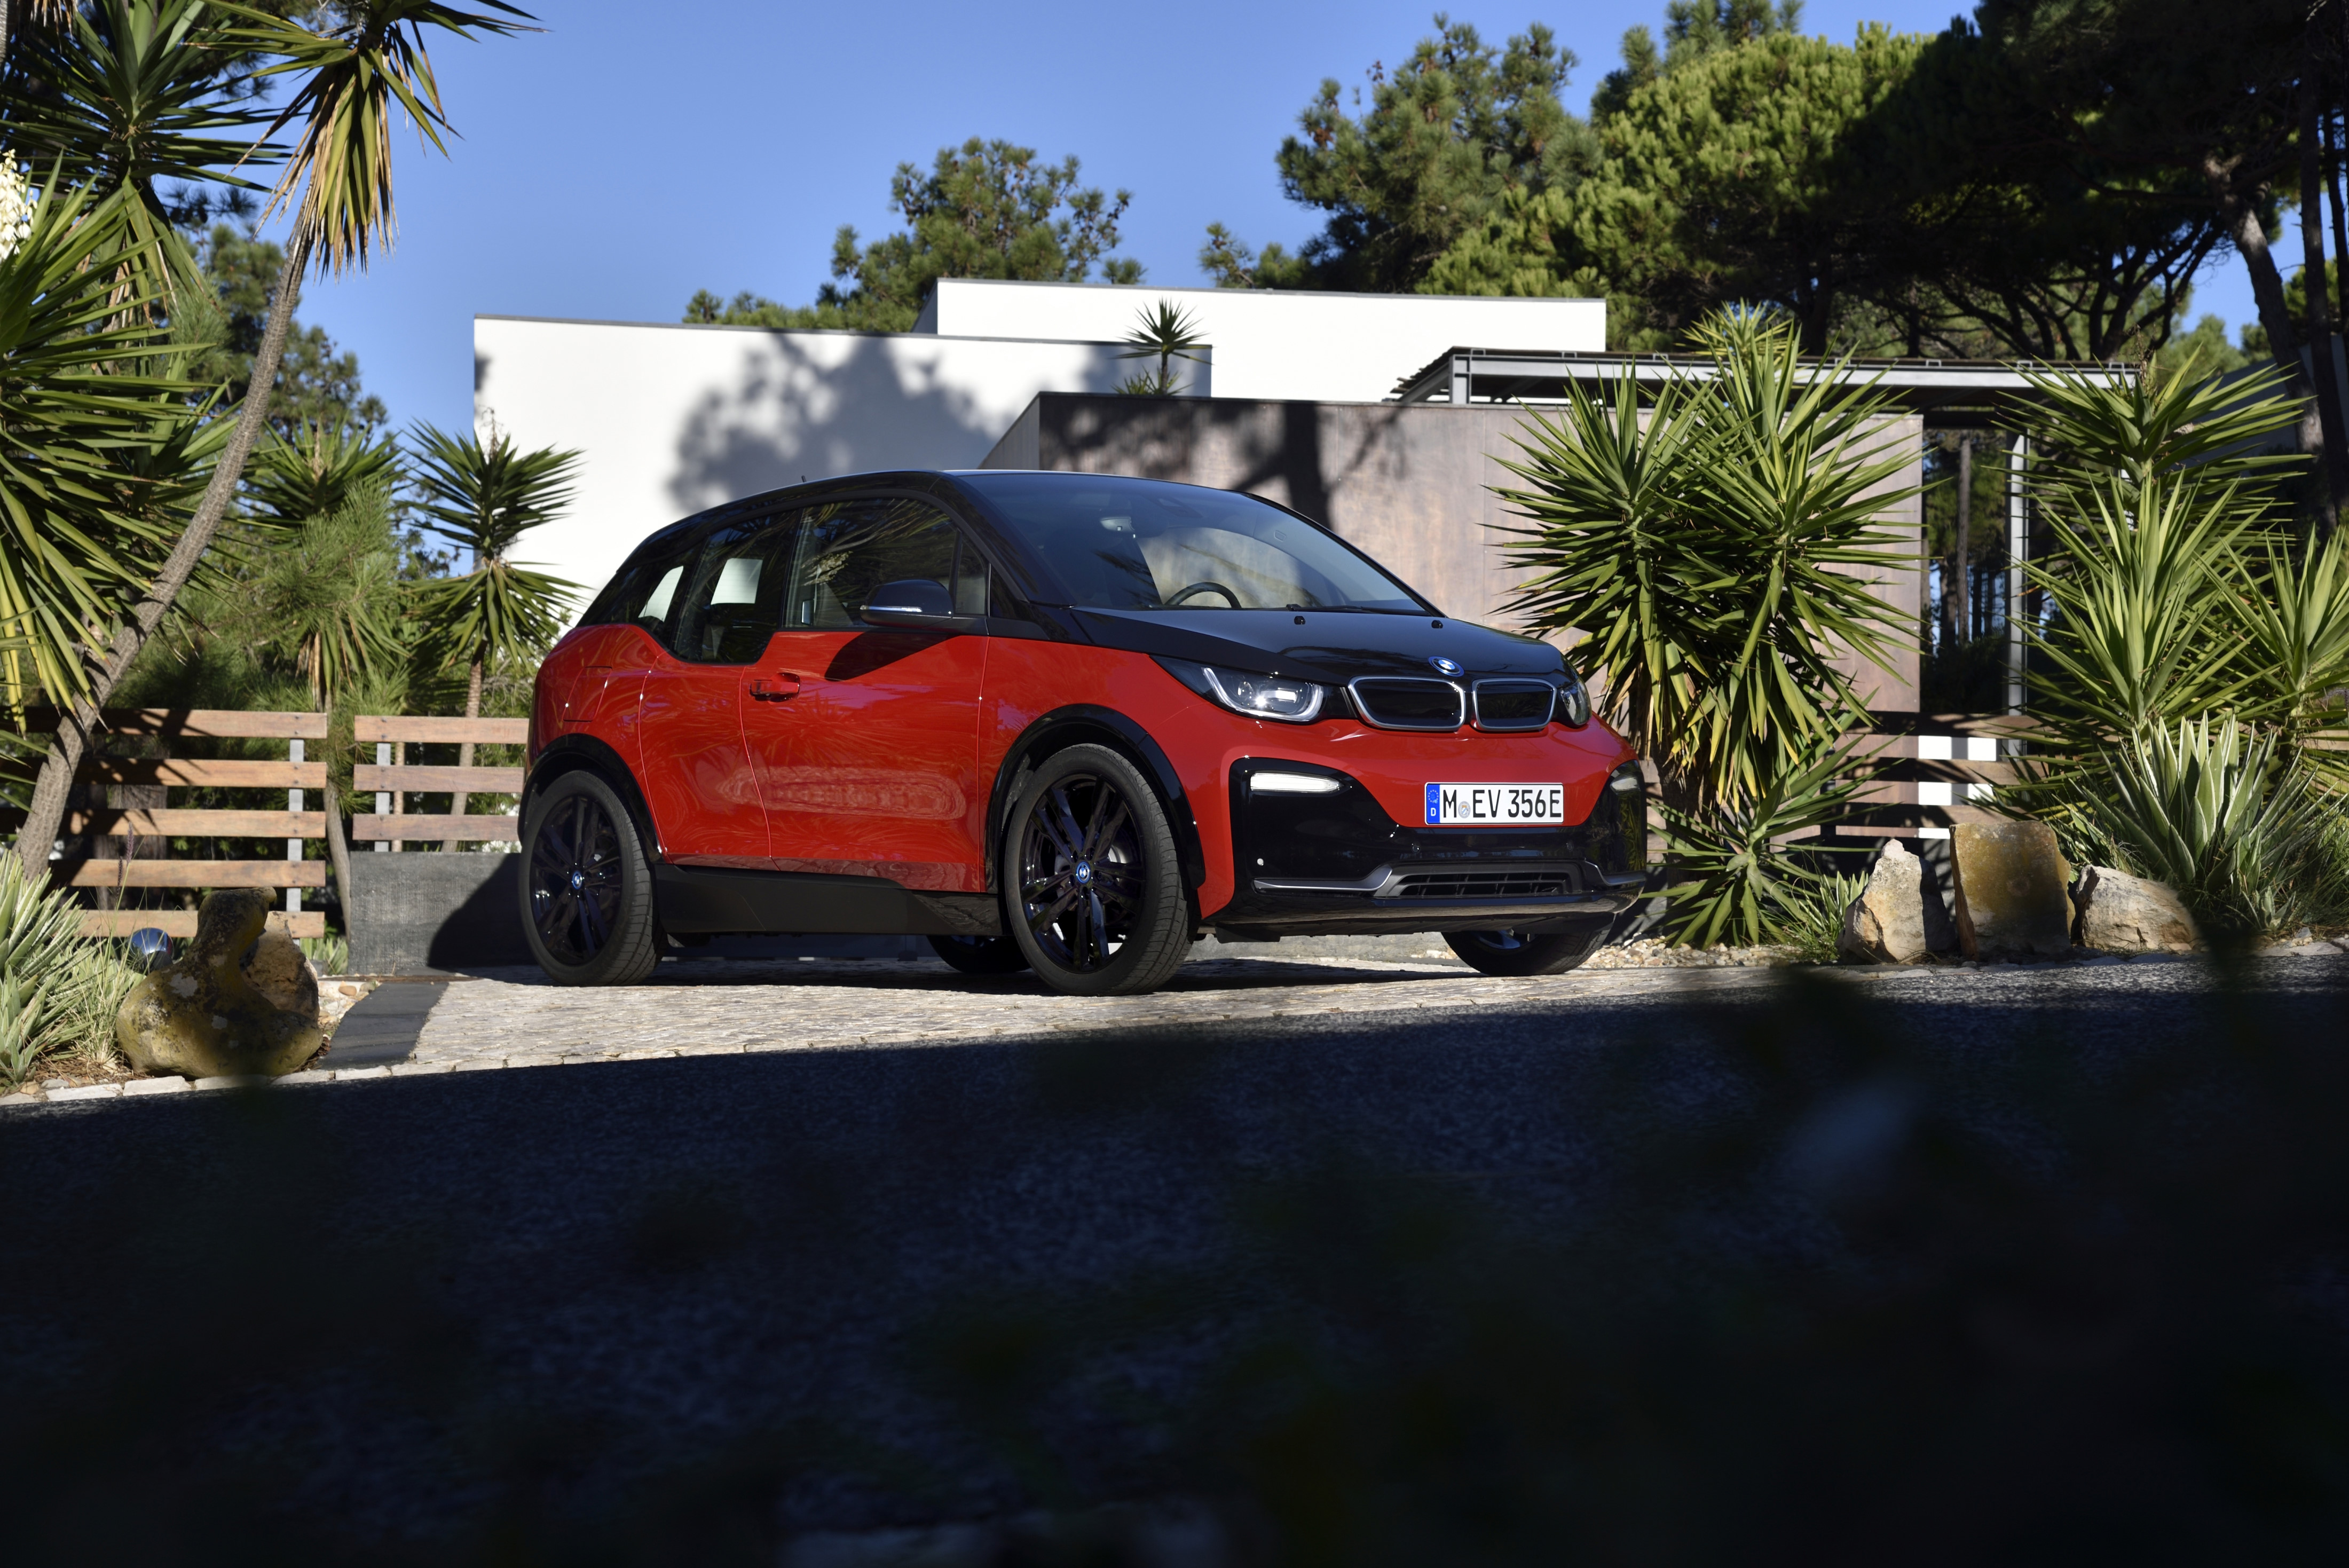 https://images.prismic.io/carwow/ff6eefe3-1513-4568-a28b-058049102707_P90287180_highRes_the-new-bmw-i3s-11-2.jpg